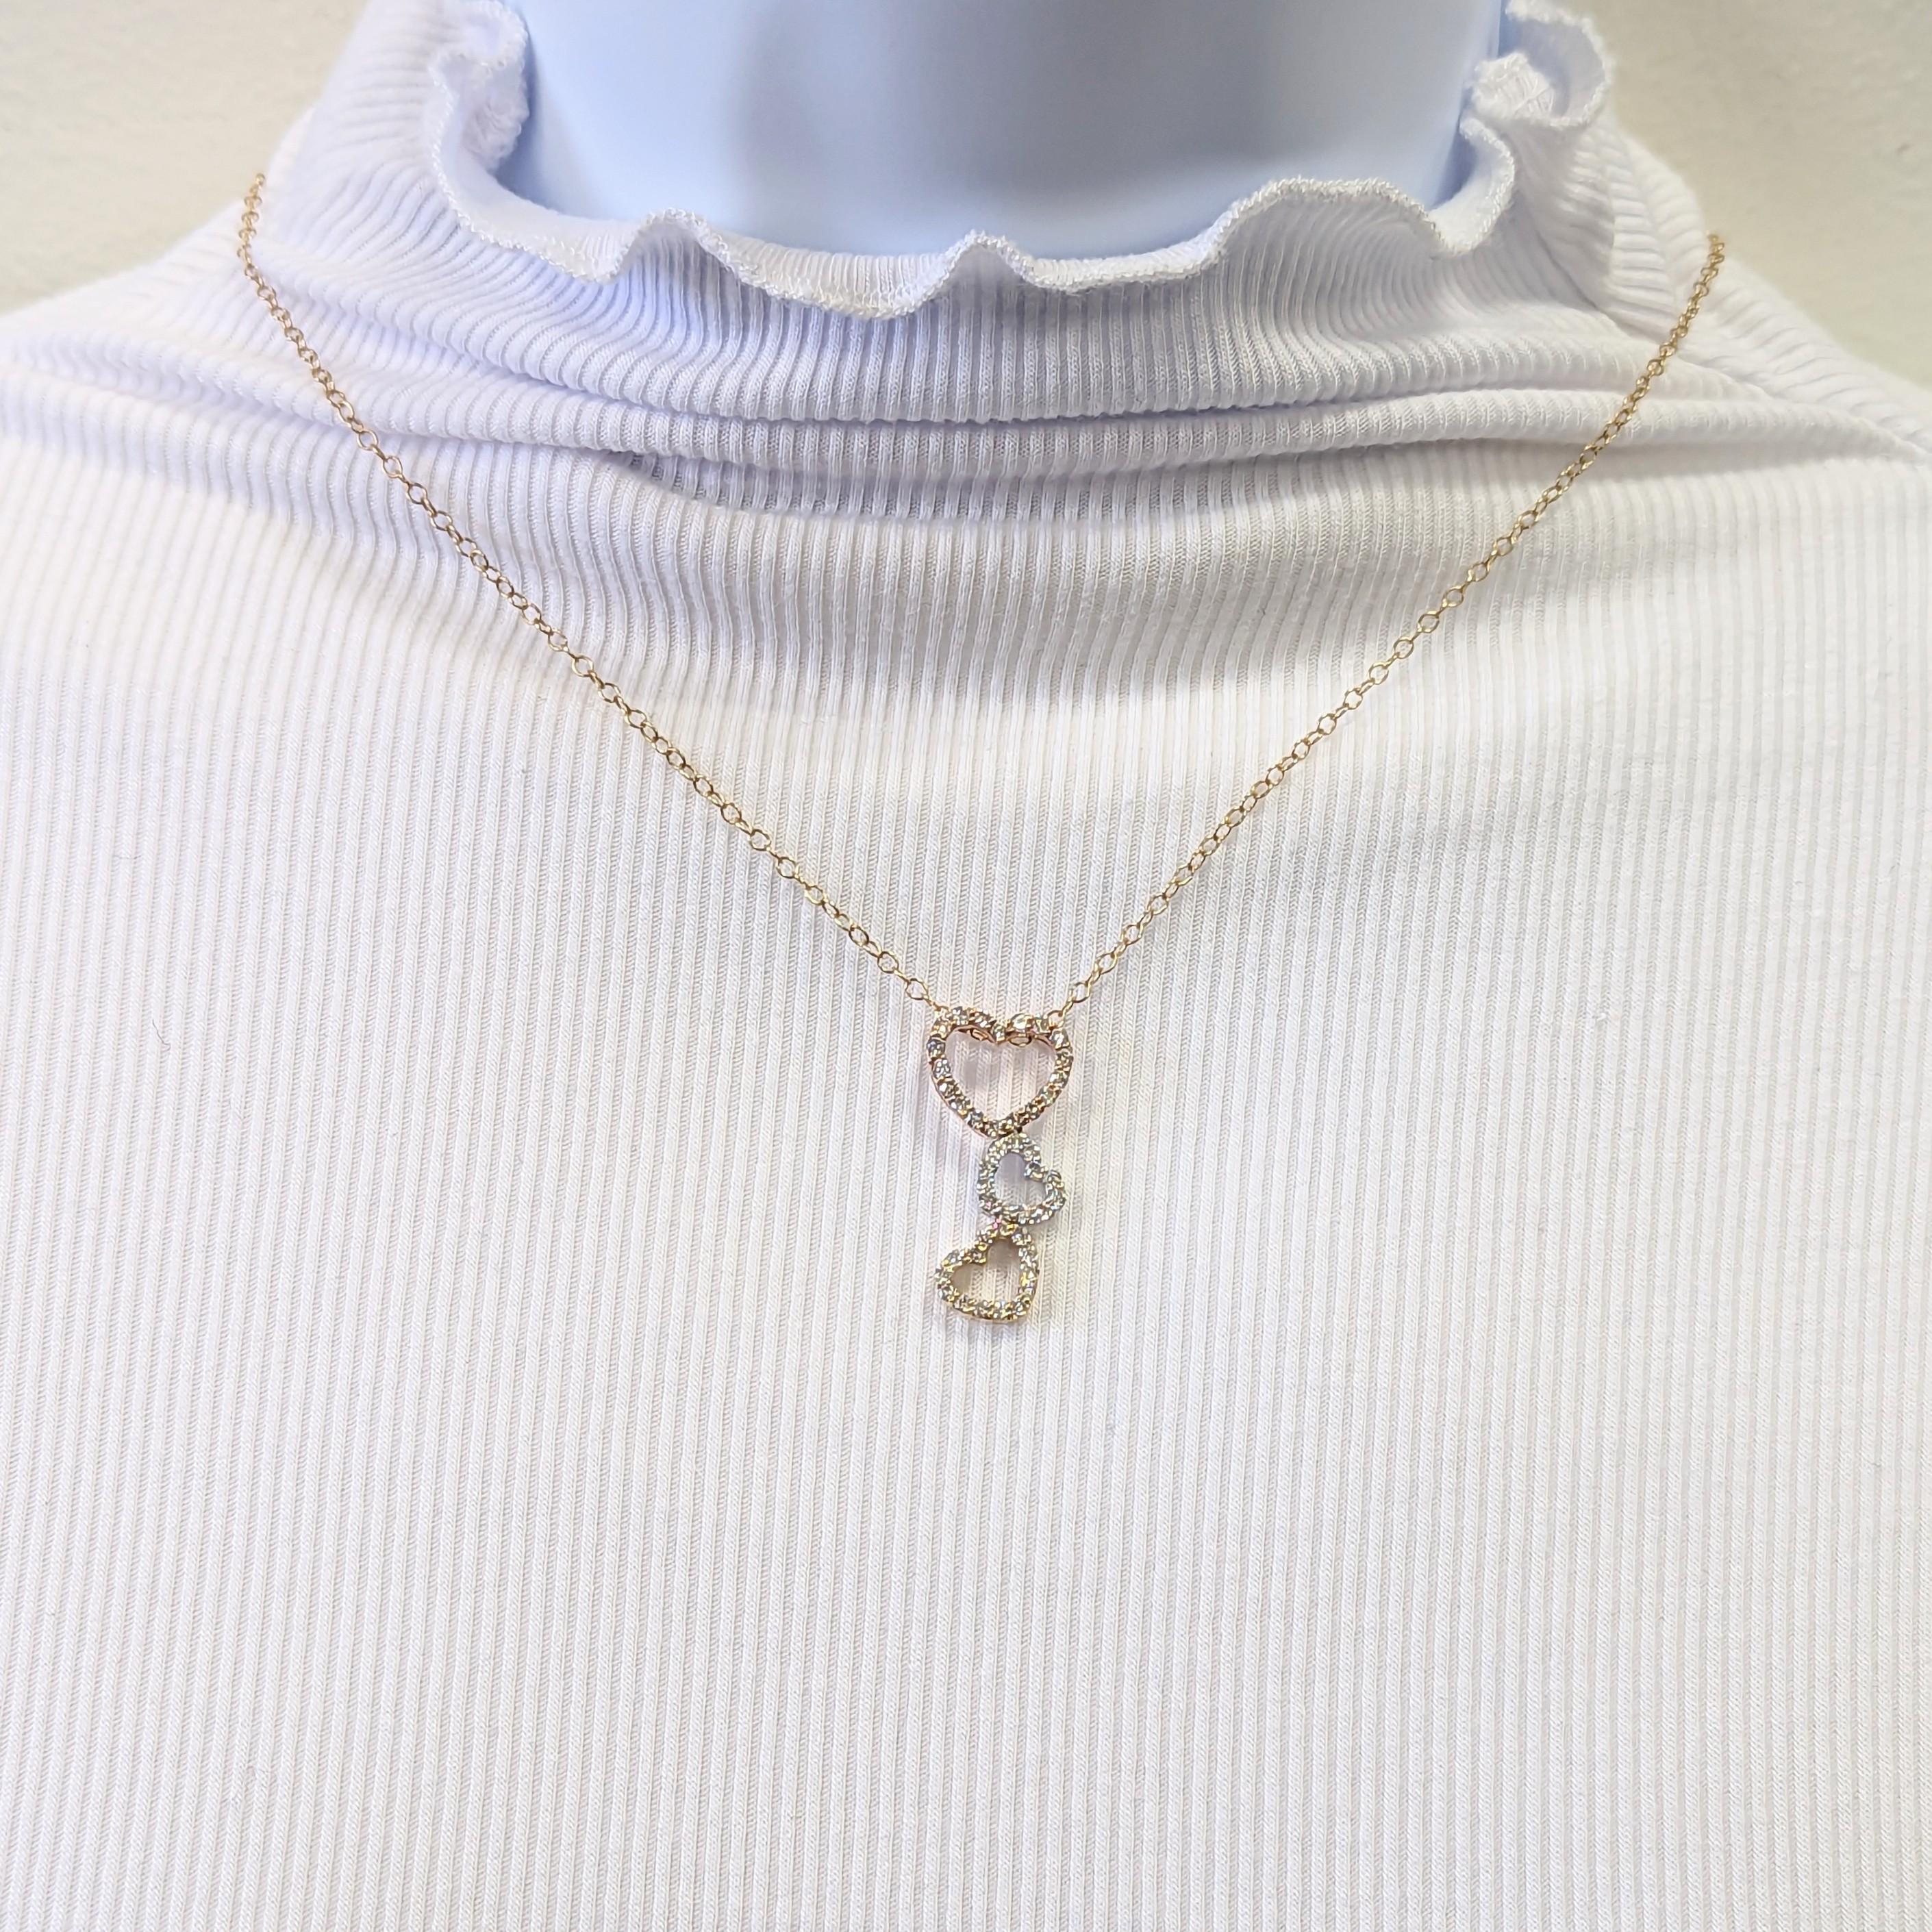 Beautiful triple heart pendant with 0.92 ct. good quality, white, and bright diamond rounds.  Handmade in white, yellow, and rose 14k gold.  Length of necklace is 16